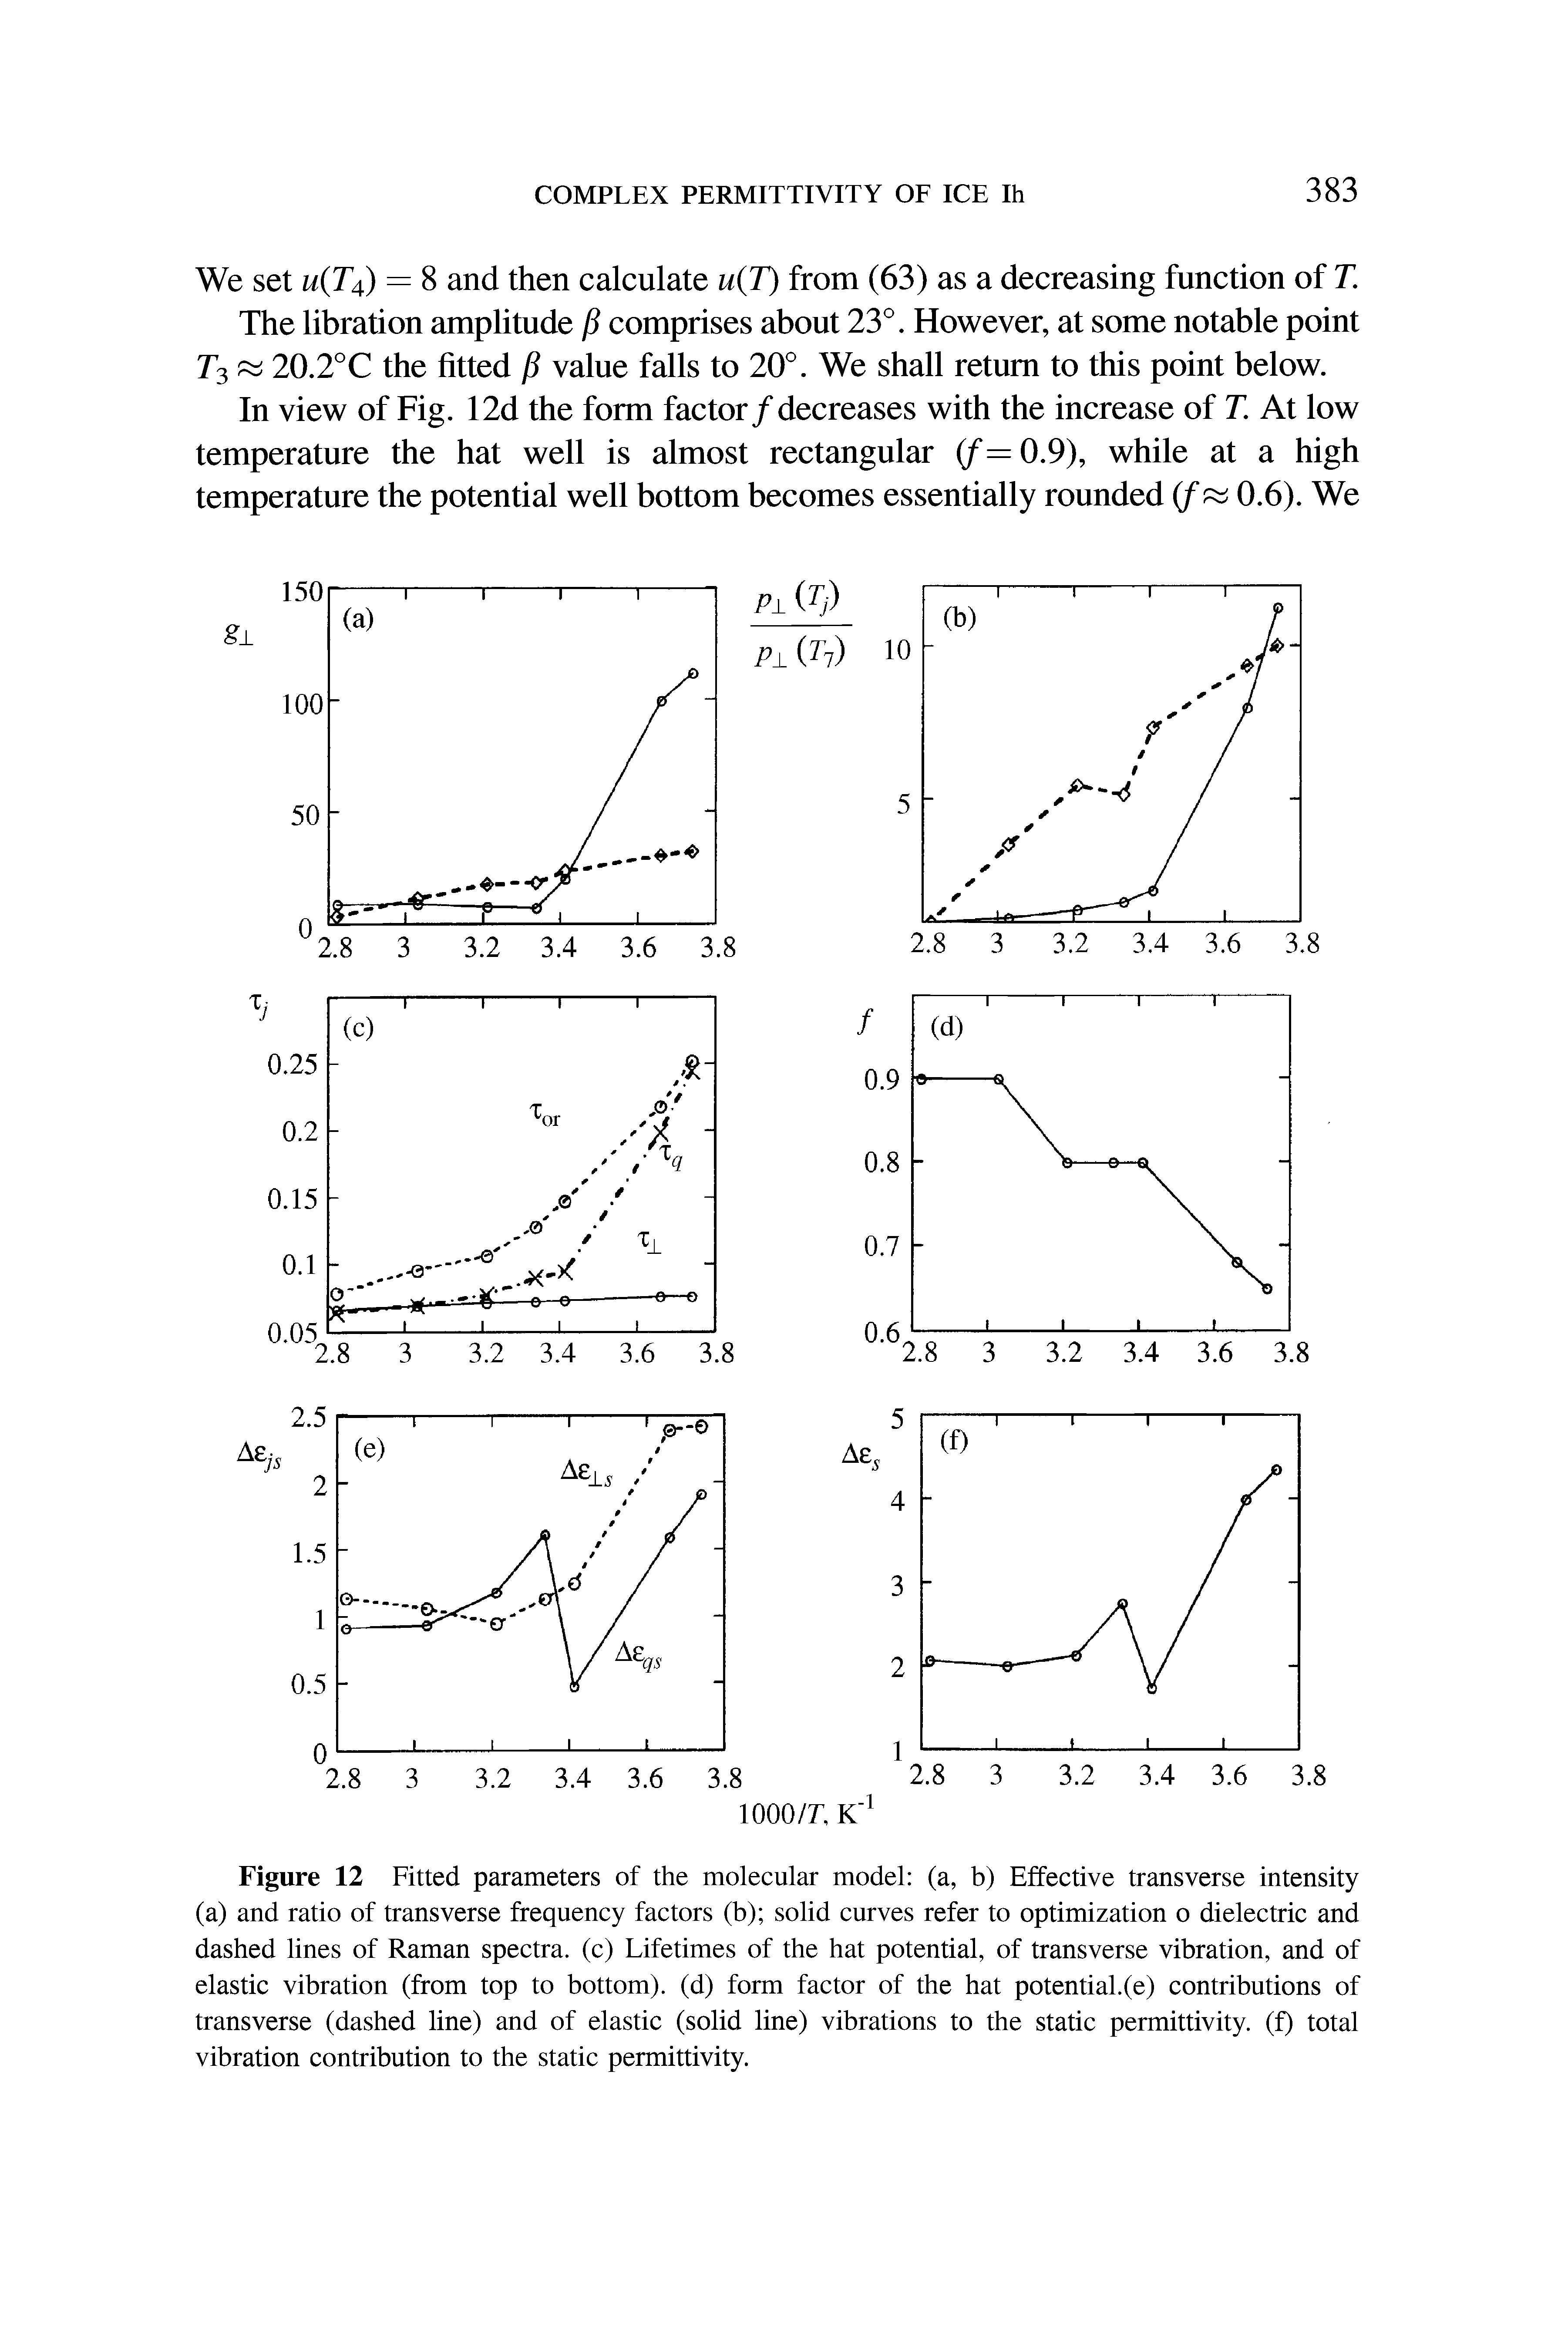 Figure 12 Fitted parameters of the molecular model (a, b) Effective transverse intensity (a) and ratio of transverse frequency factors (b) solid curves refer to optimization o dielectric and dashed lines of Raman spectra, (c) Lifetimes of the hat potential, of transverse vibration, and of elastic vibration (from top to bottom), (d) form factor of the hat potential.(e) contributions of transverse (dashed line) and of elastic (solid line) vibrations to the static permittivity, (f) total vibration contribution to the static permittivity.